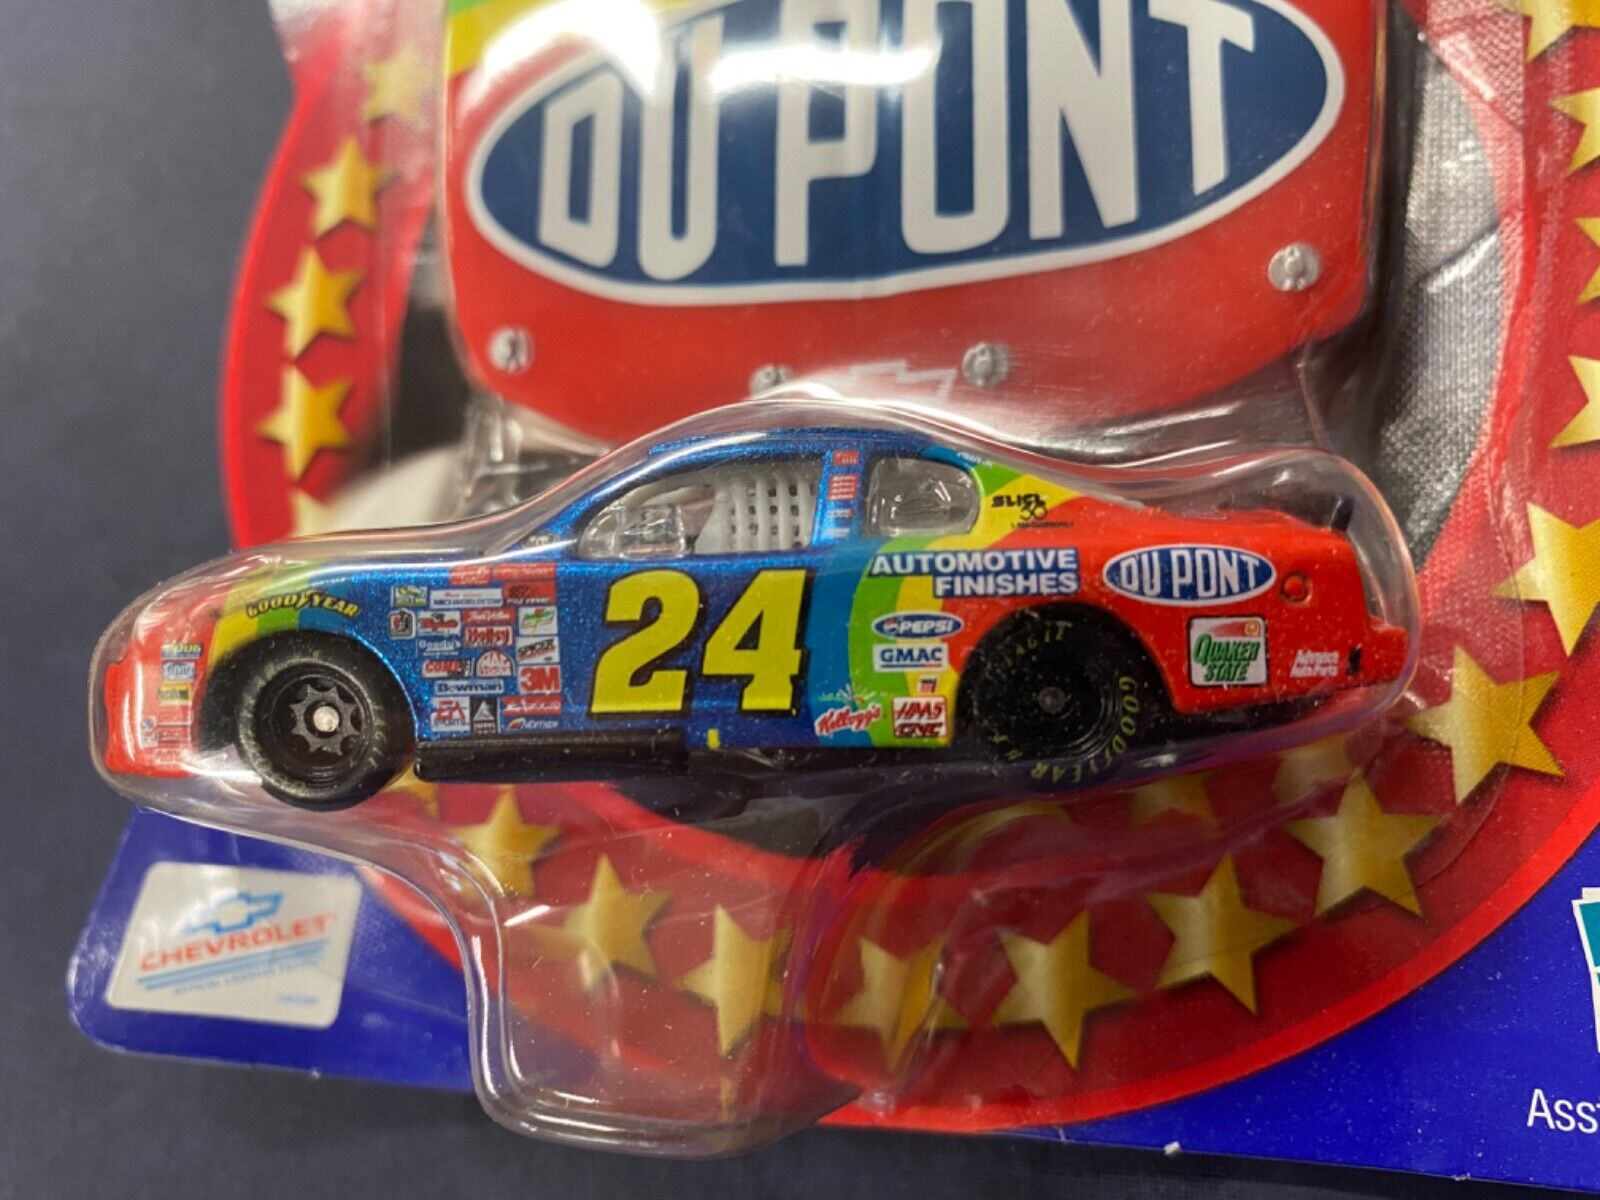 Jeff Gordon Winners Circle Deluxe Condition DuPont Chevrolet 24